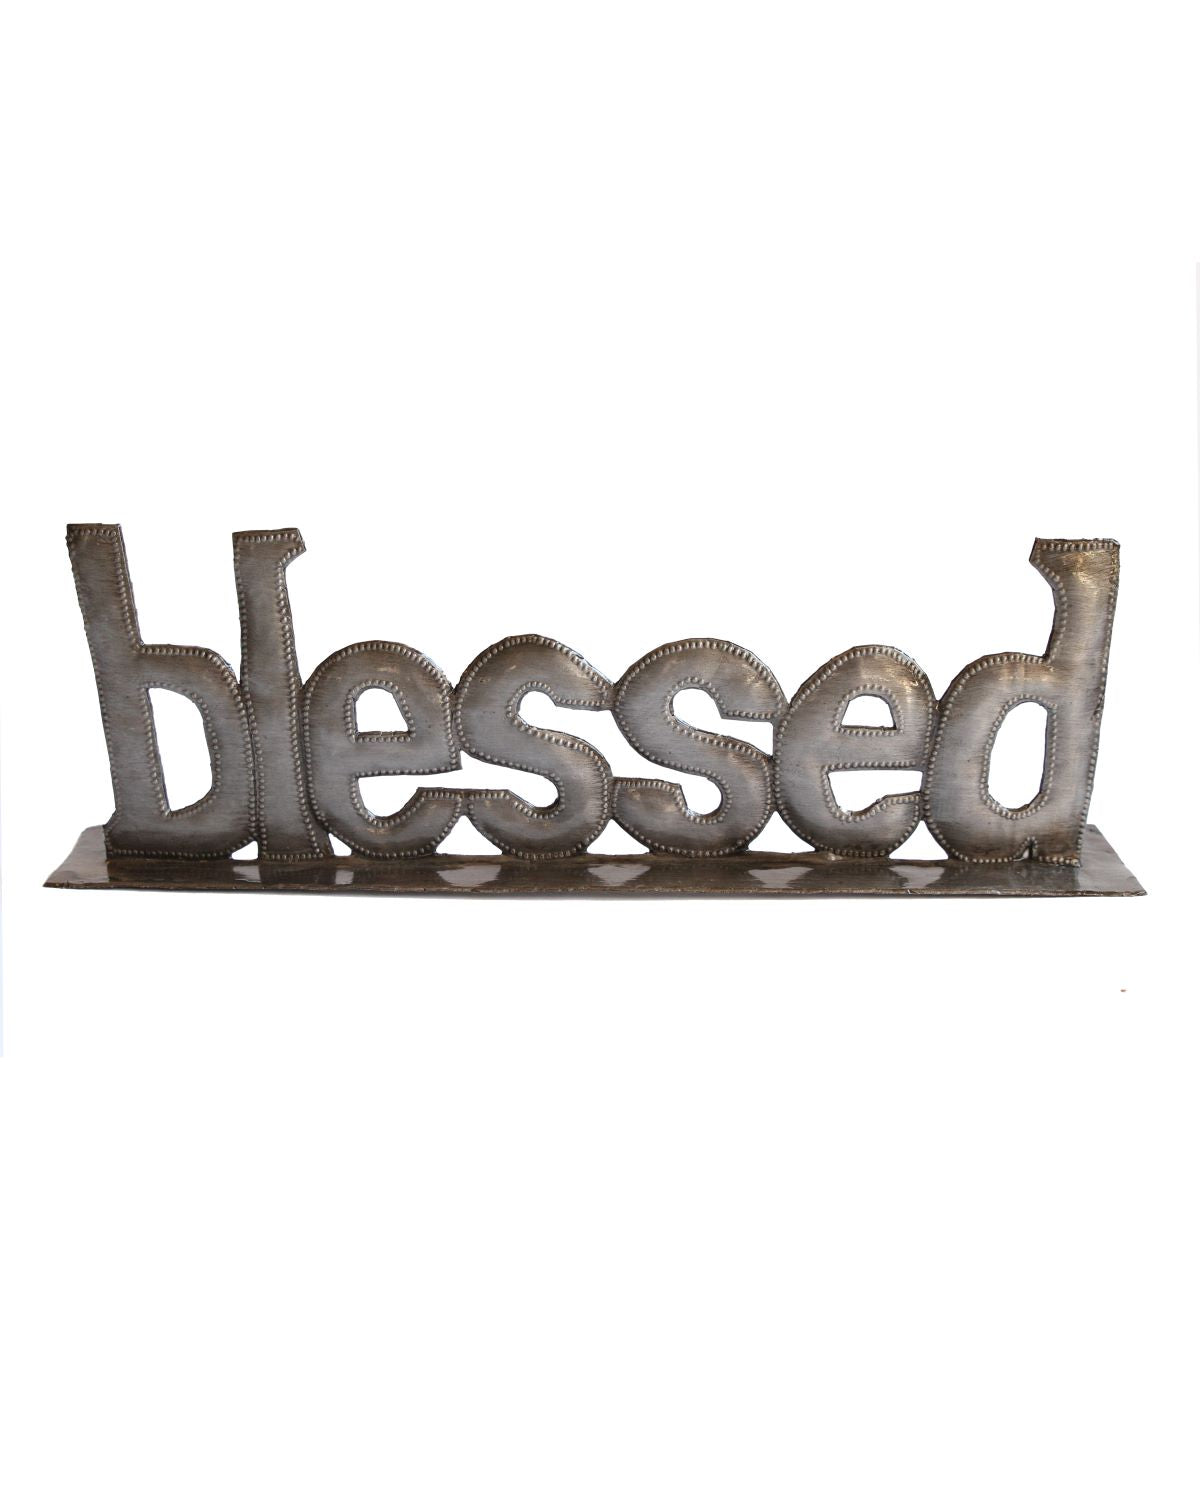 Blessed Standing Metal Art